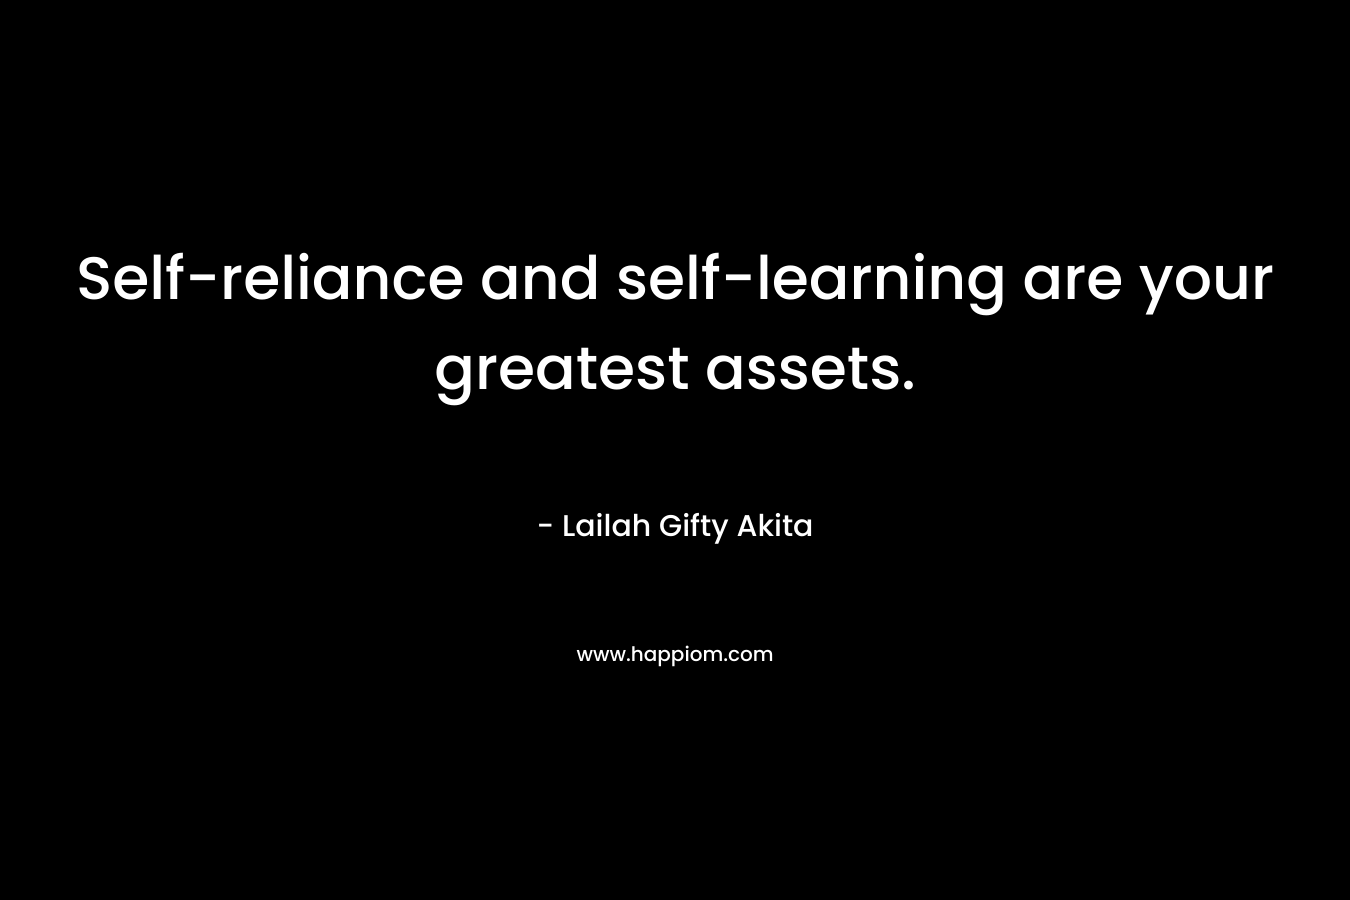 Self-reliance and self-learning are your greatest assets. – Lailah Gifty Akita